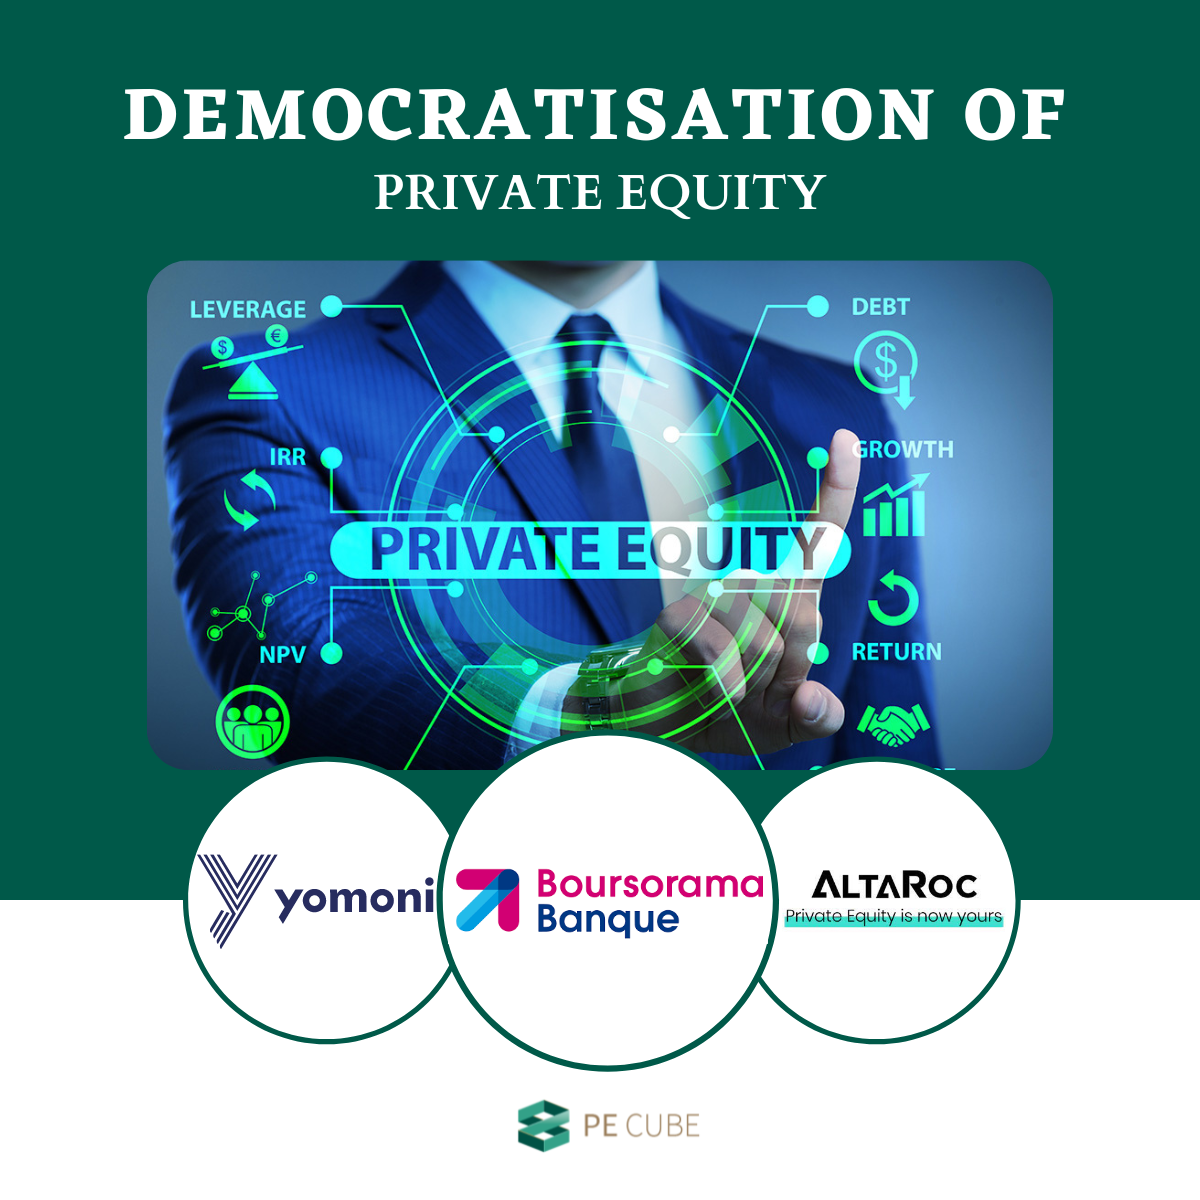 Democratisation of private equity